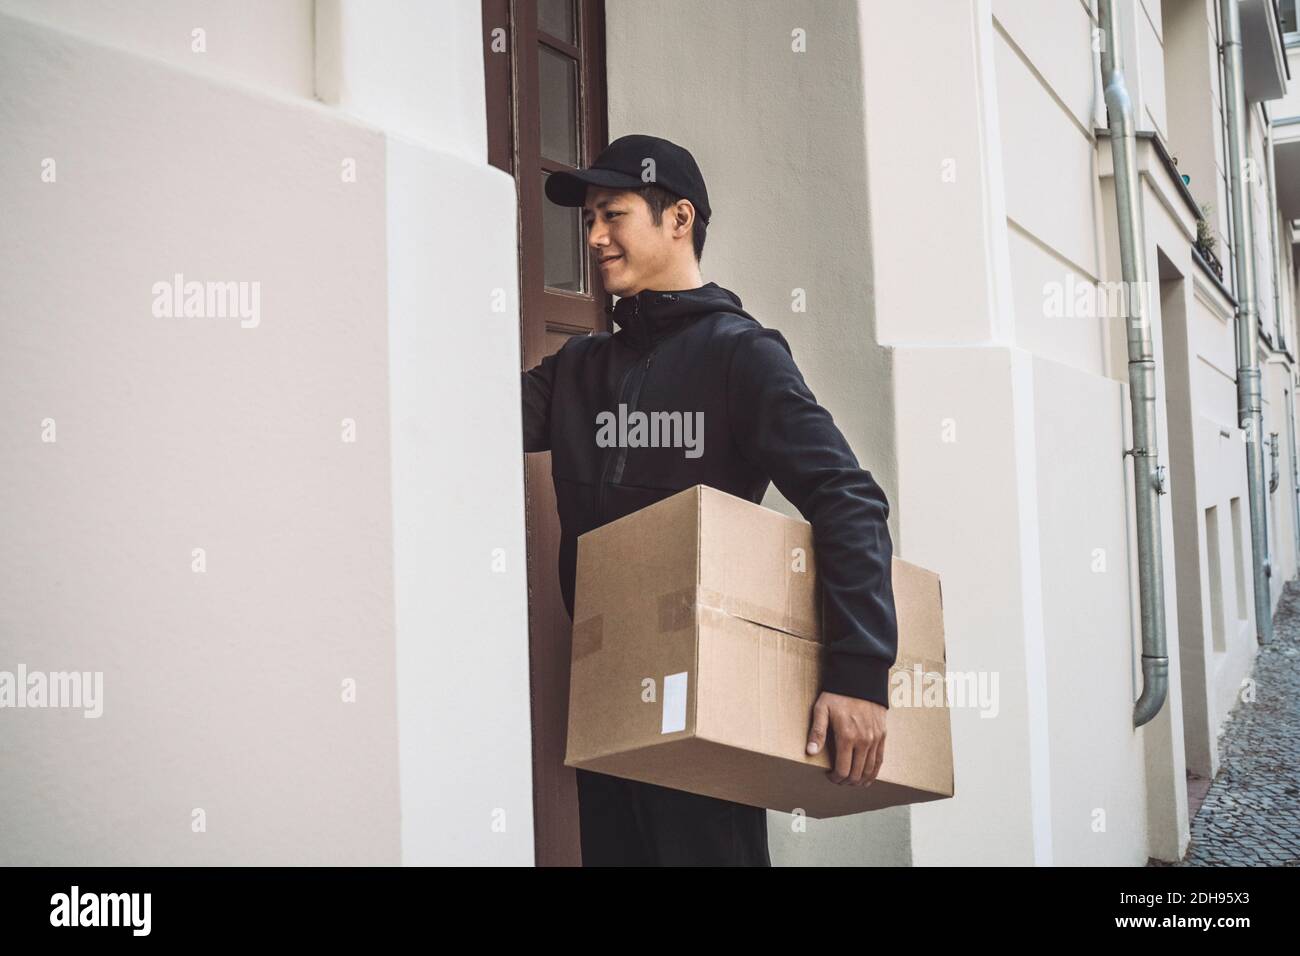 Smiling delivery man with package standing at doorstep Stock Photo